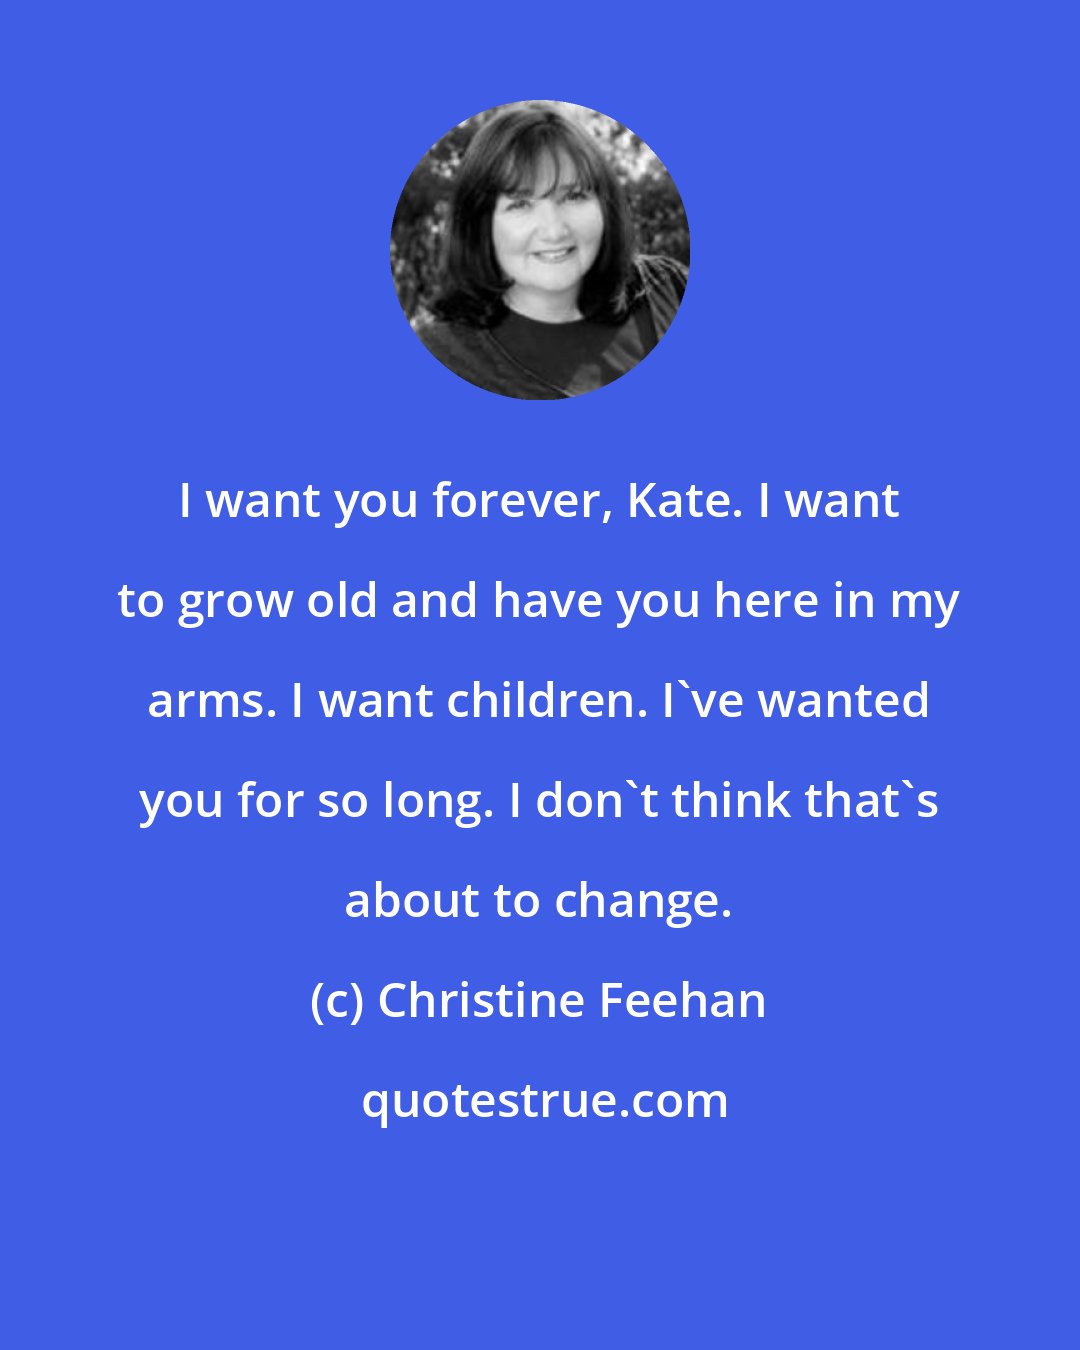 Christine Feehan: I want you forever, Kate. I want to grow old and have you here in my arms. I want children. I've wanted you for so long. I don't think that's about to change.